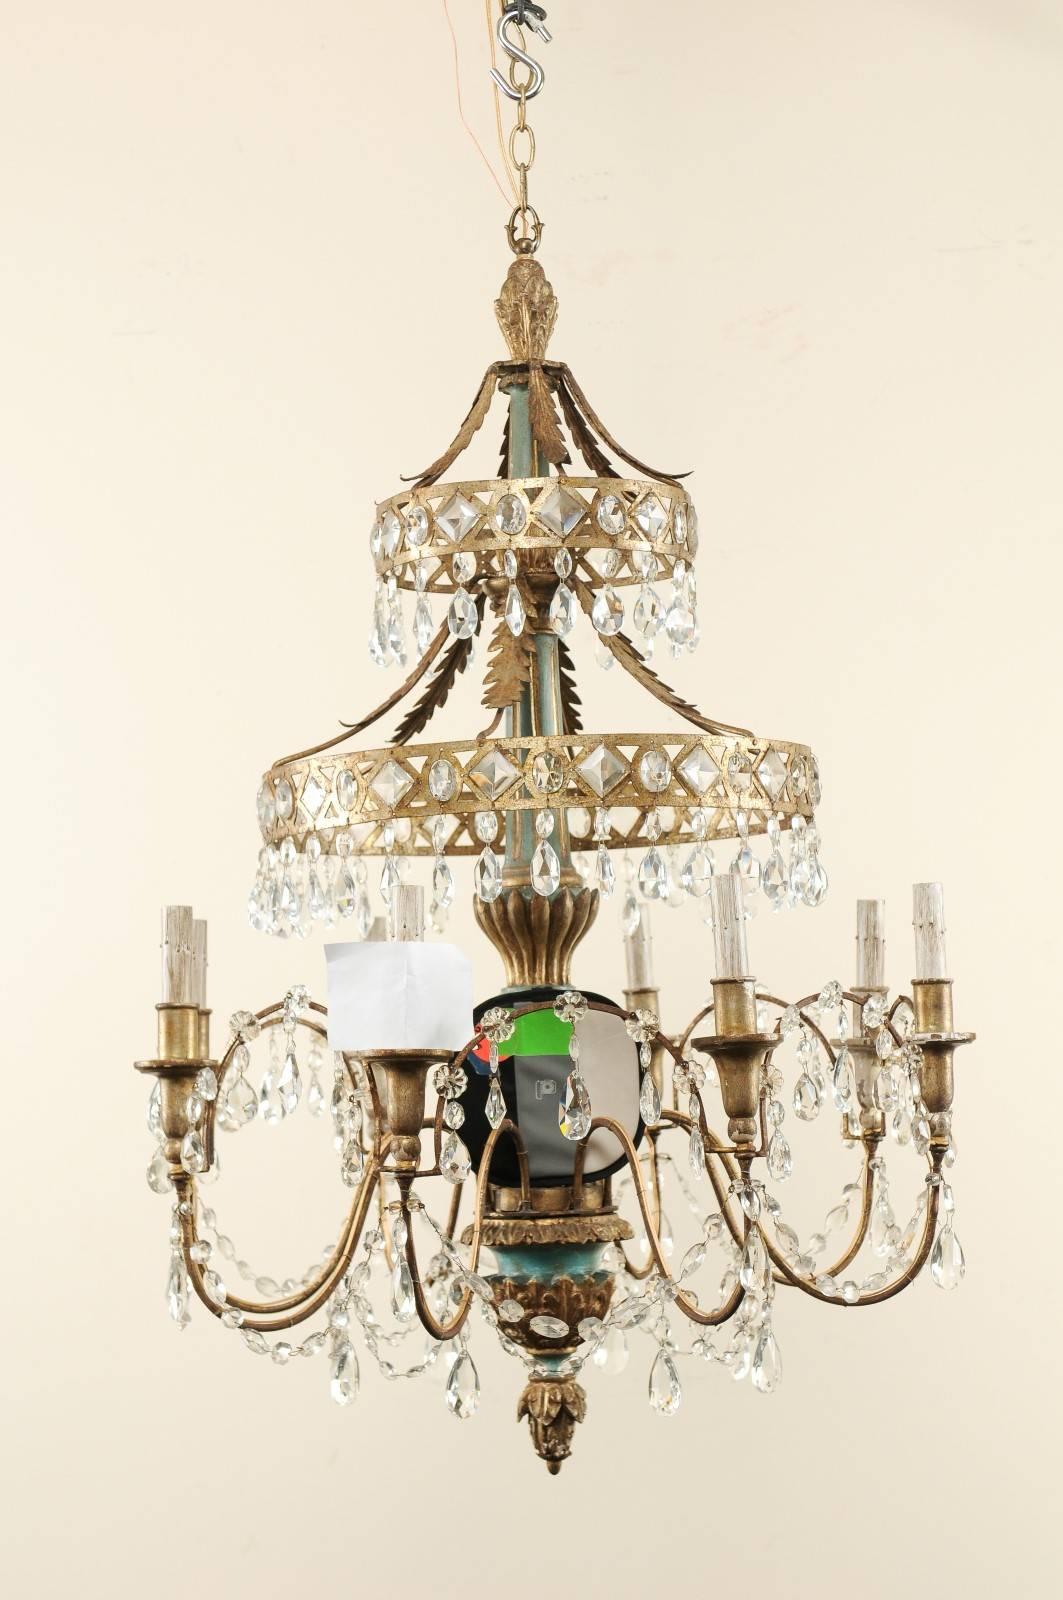 A midcentury Italian eight-light chandelier of crystal, wood, and metal. This unique Italian chandelier from the mid-20th century features a carved wood column, with gilt and gesso, with fluid s-shaped swooping arms lifting up and out from its